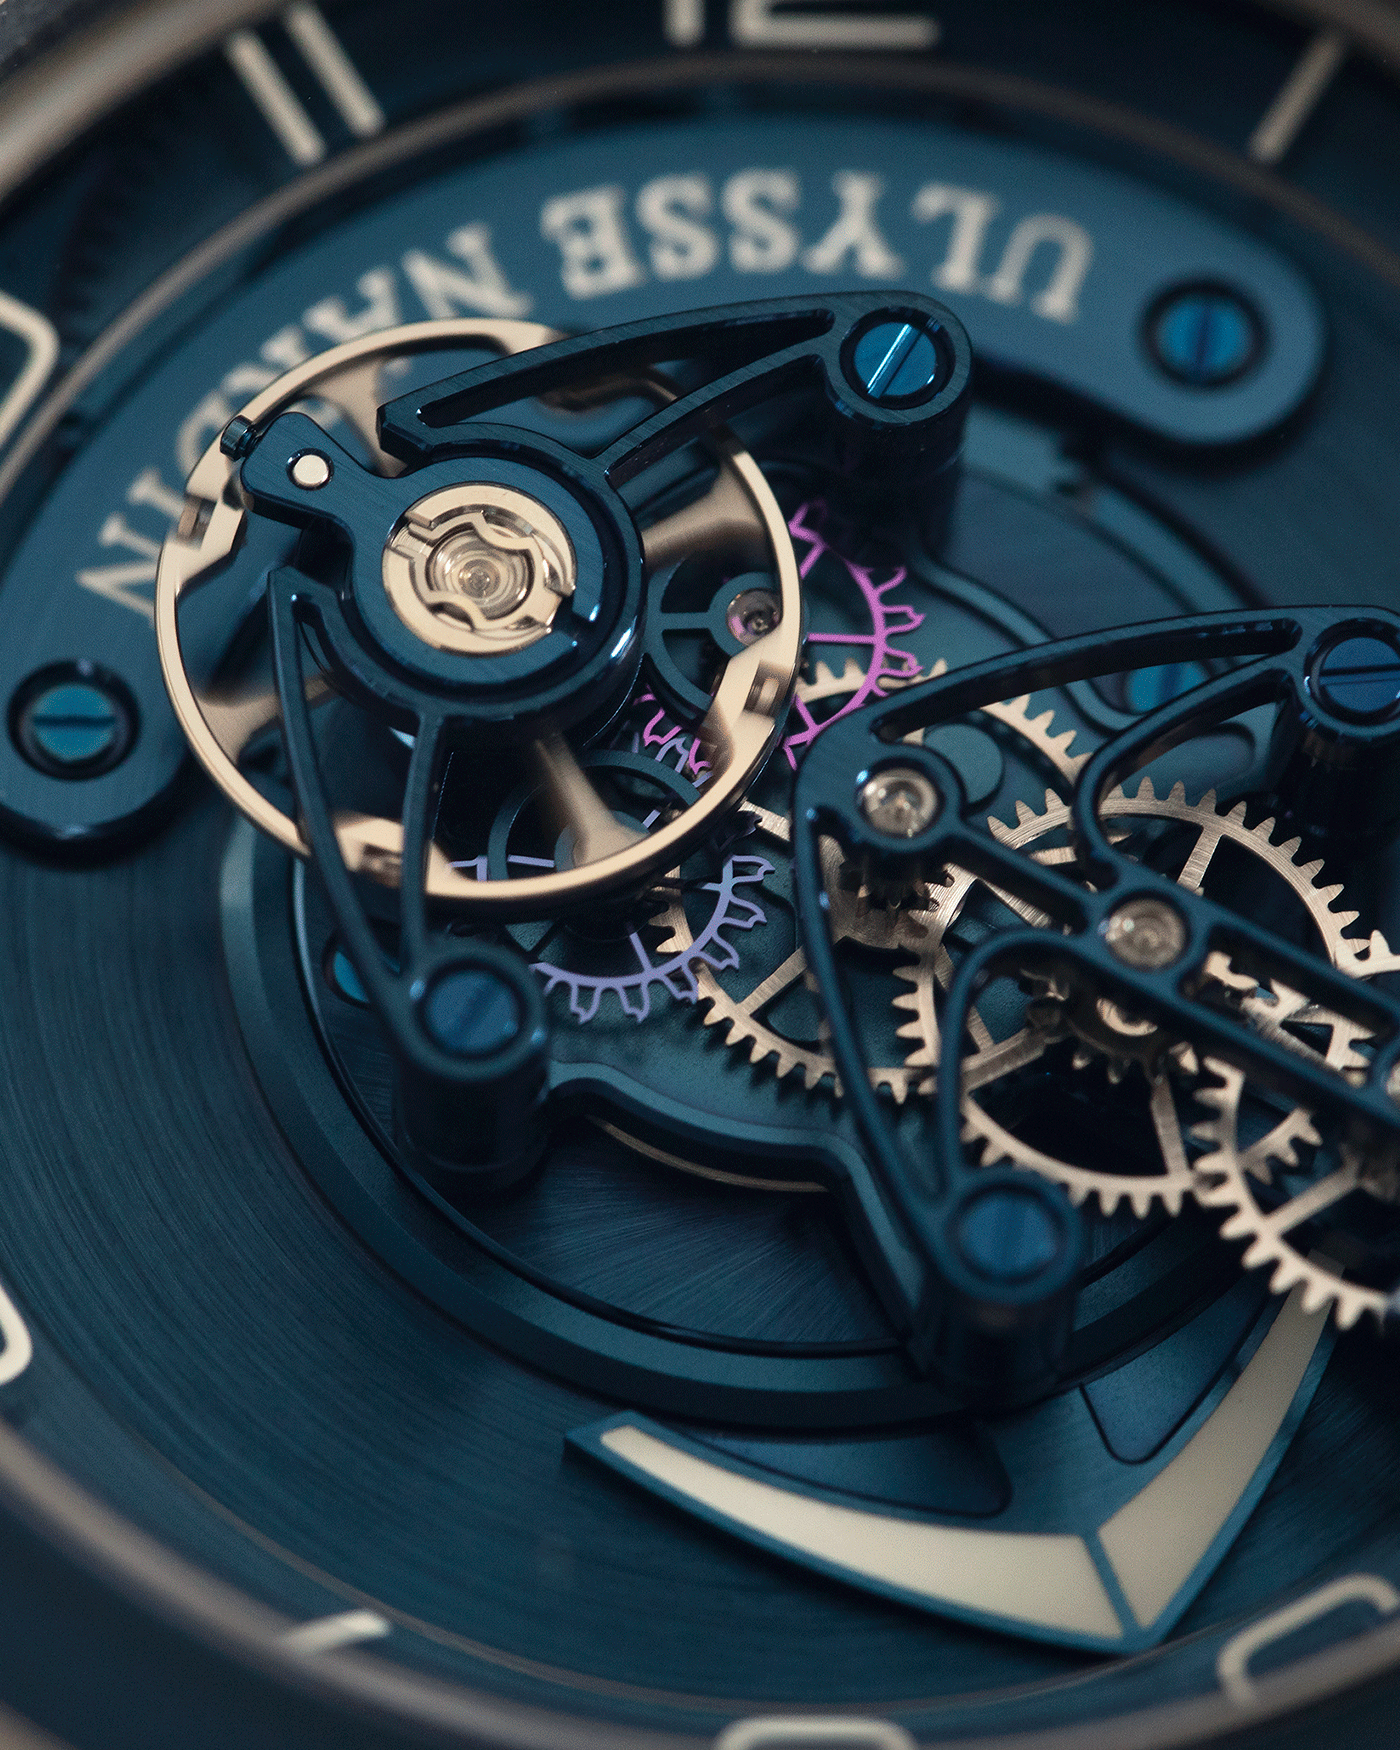 Brand: Ulysse Nardin Year: 2020 Model: Freak Out Reference: DB25 Material: Titanium Movement: In-House Manually-Wound UN-205 Case Diameter: 45mm Strap: Ulysse Nardin Blue Leather-Backed Textile Strap with Titanium Deployant